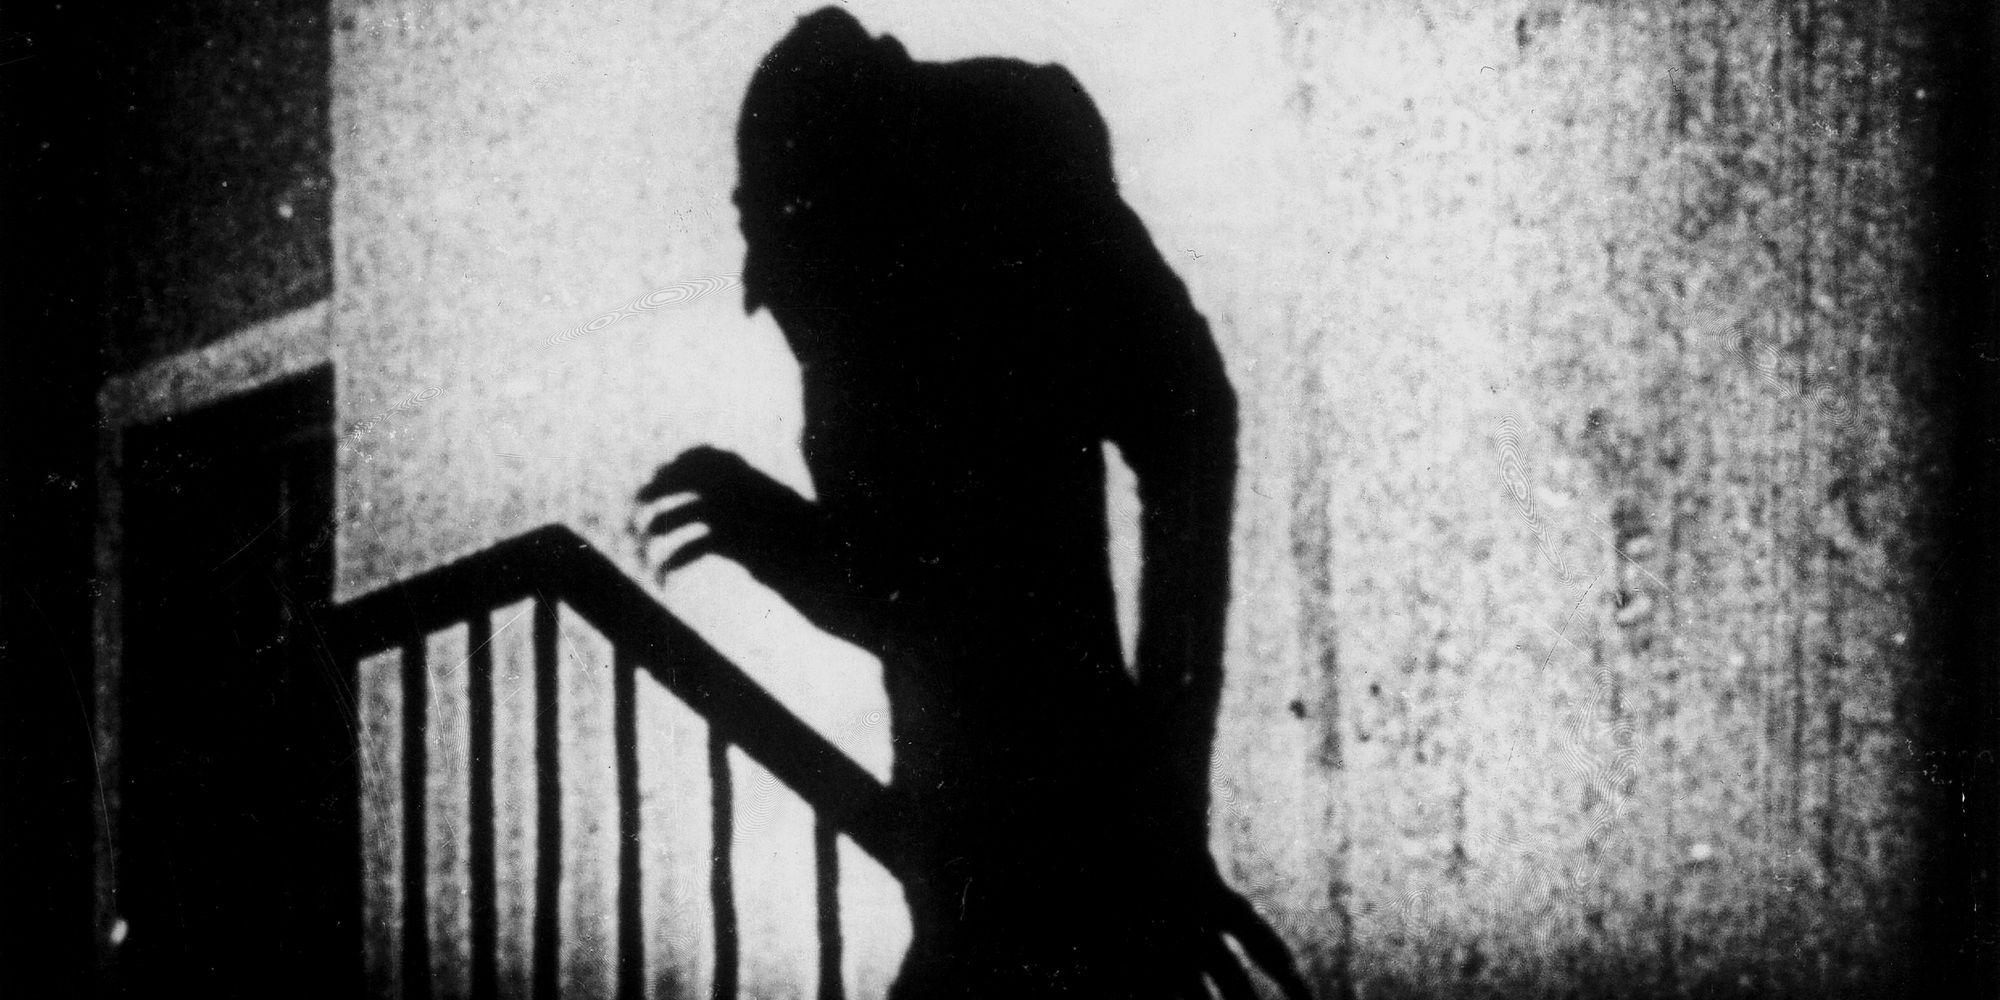 Nosferatu is a 1922 German Expressionist horror film, directed by F. W. Murnau, starring Max Schreck as the vampire Count Orlok. The film was an unauthorized adaptation of Bram Stoker's Dracula, with names and other details changed because the studio coul